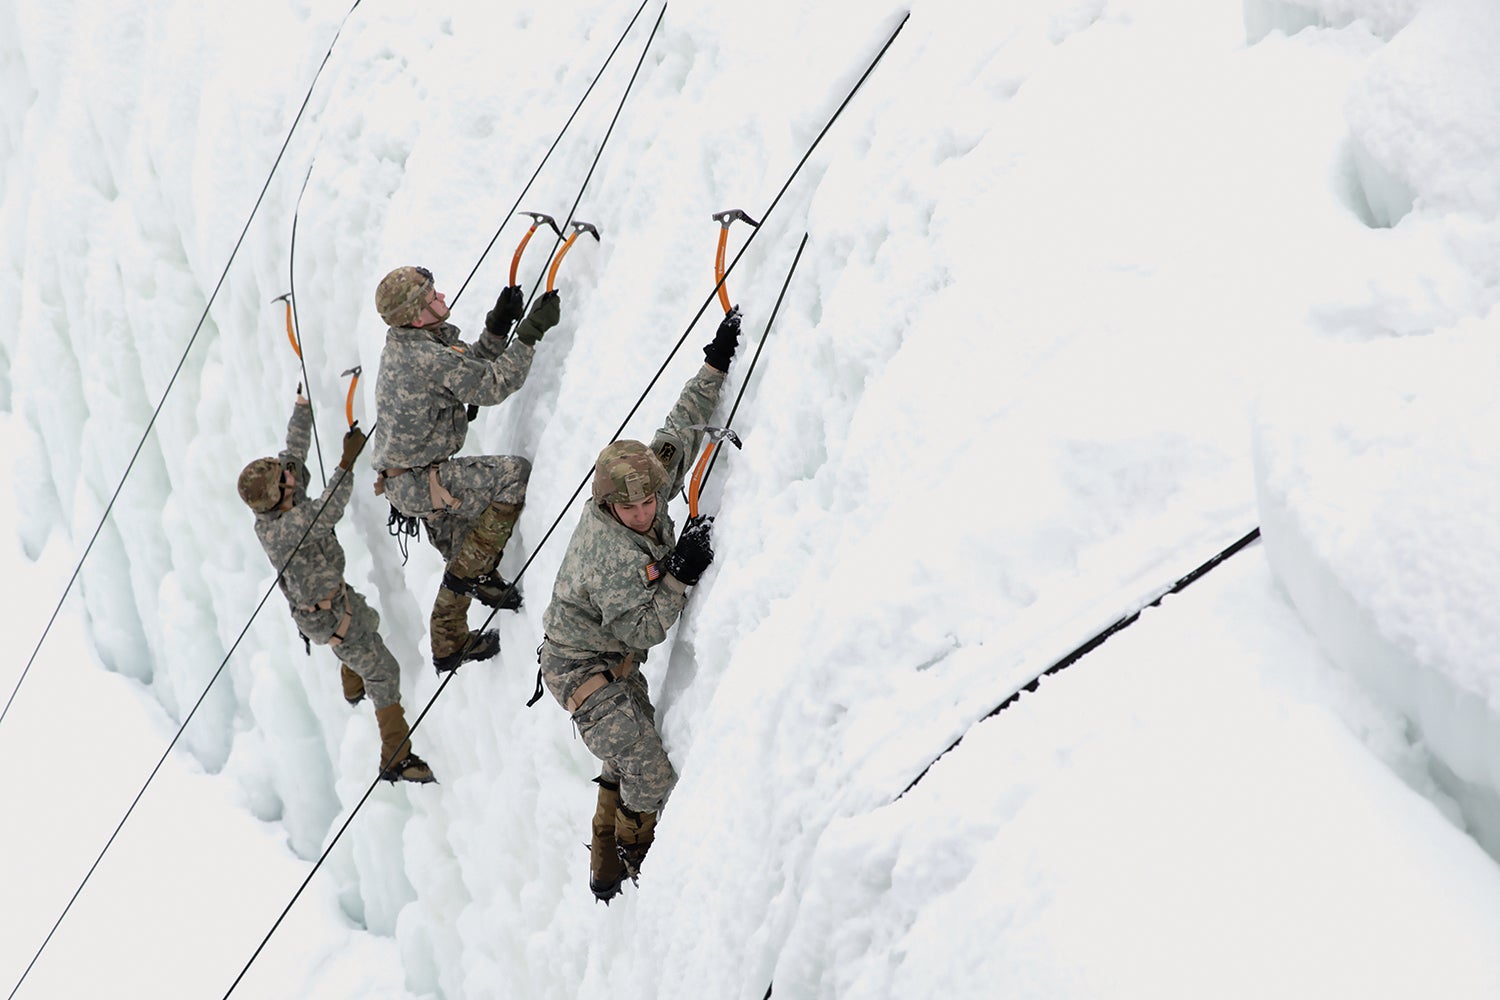 Soldiers with the Vermont Army National Guard’s 86th Infantry Brigade Combat Team (Mountain) ice-climb at the Ethan Allen Firing Range, Jericho. (Credit: Army National Guard/Staff Sgt. Barbara Pendl)